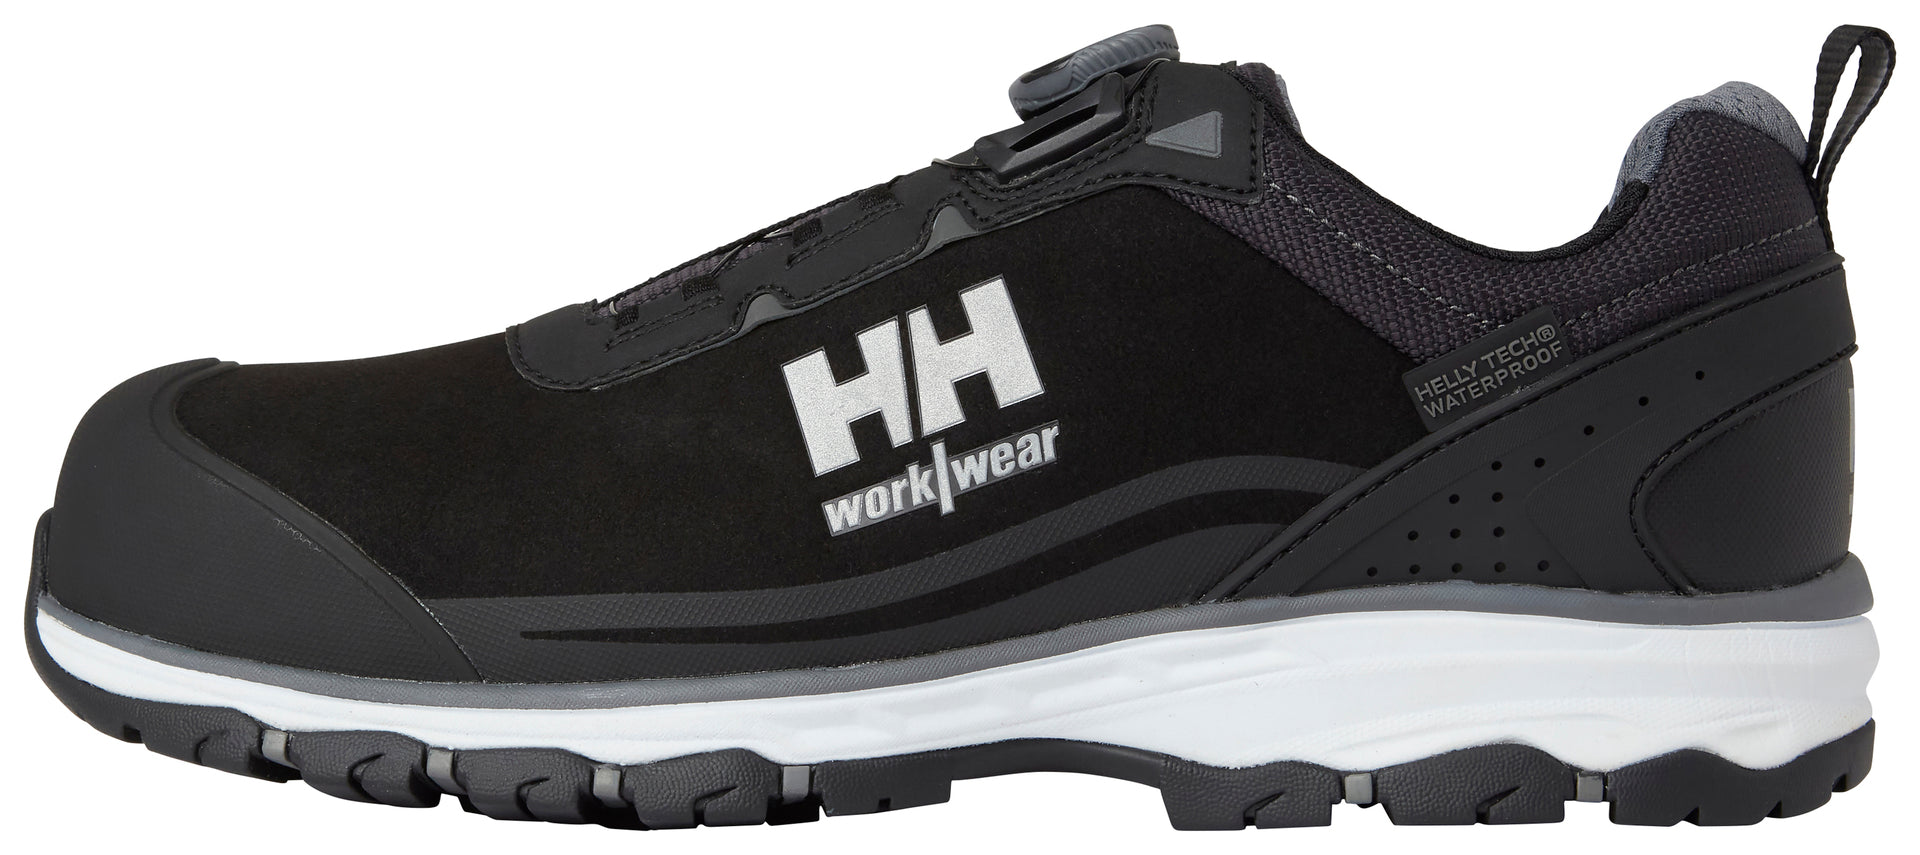 Helly Hansen Chelsea Evo 2 Low Safety Shoes - Black/Grey